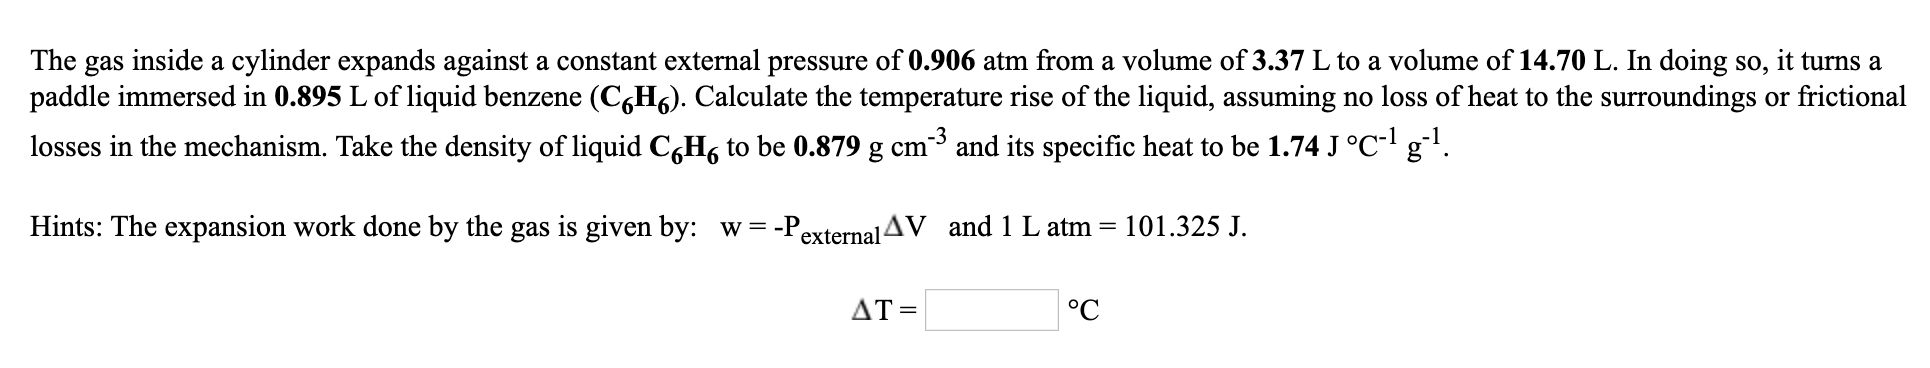 calculating workdone with temperature increase